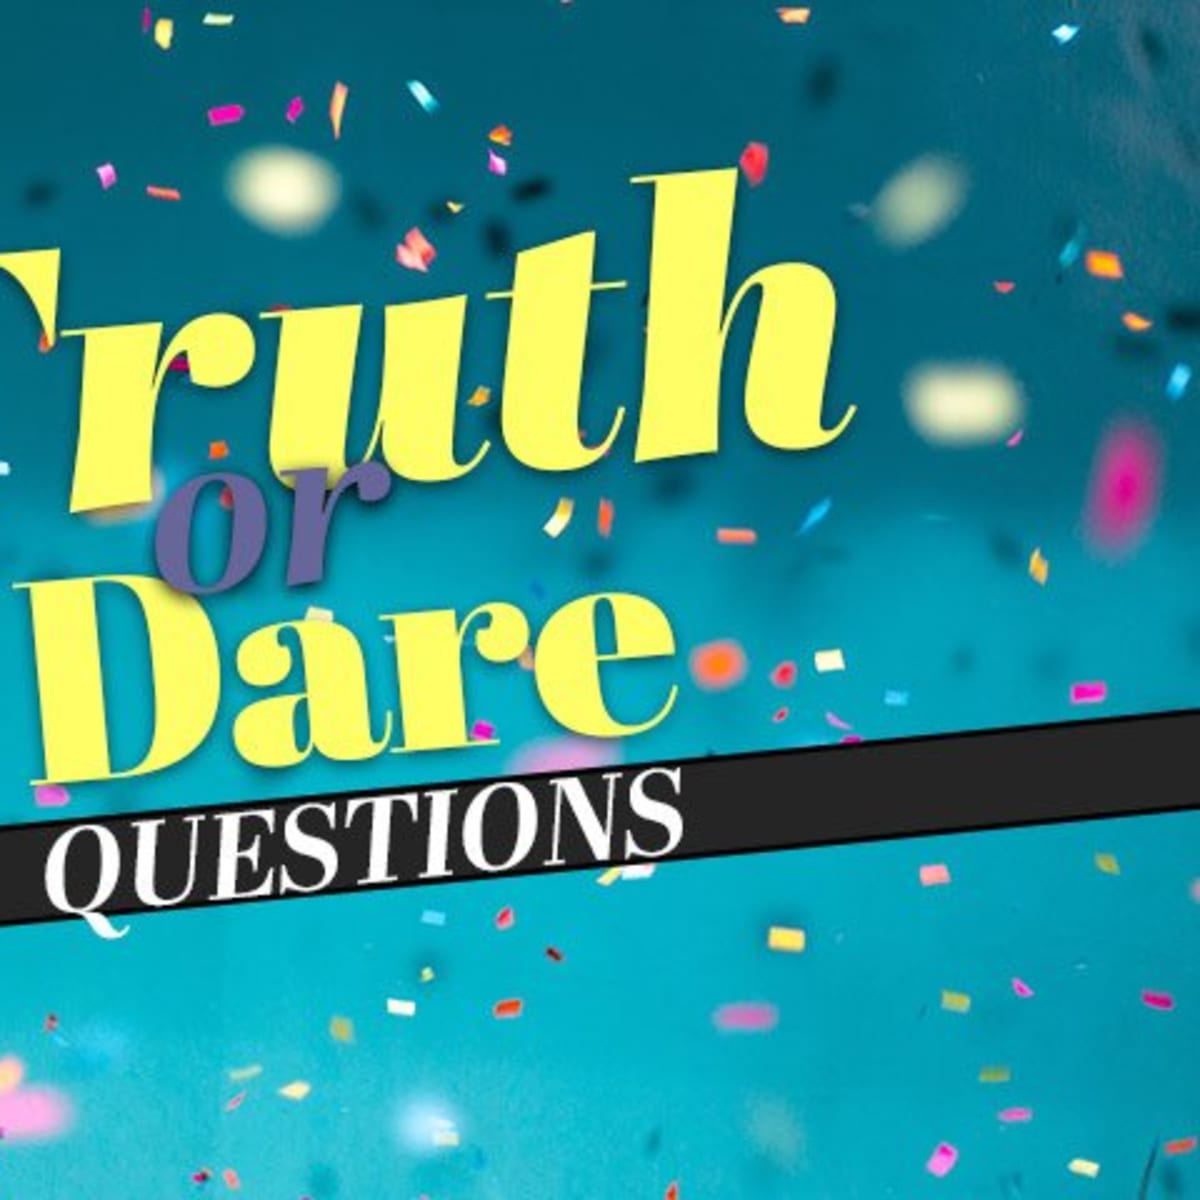 brian blackie recommends Truth And Dare Stories